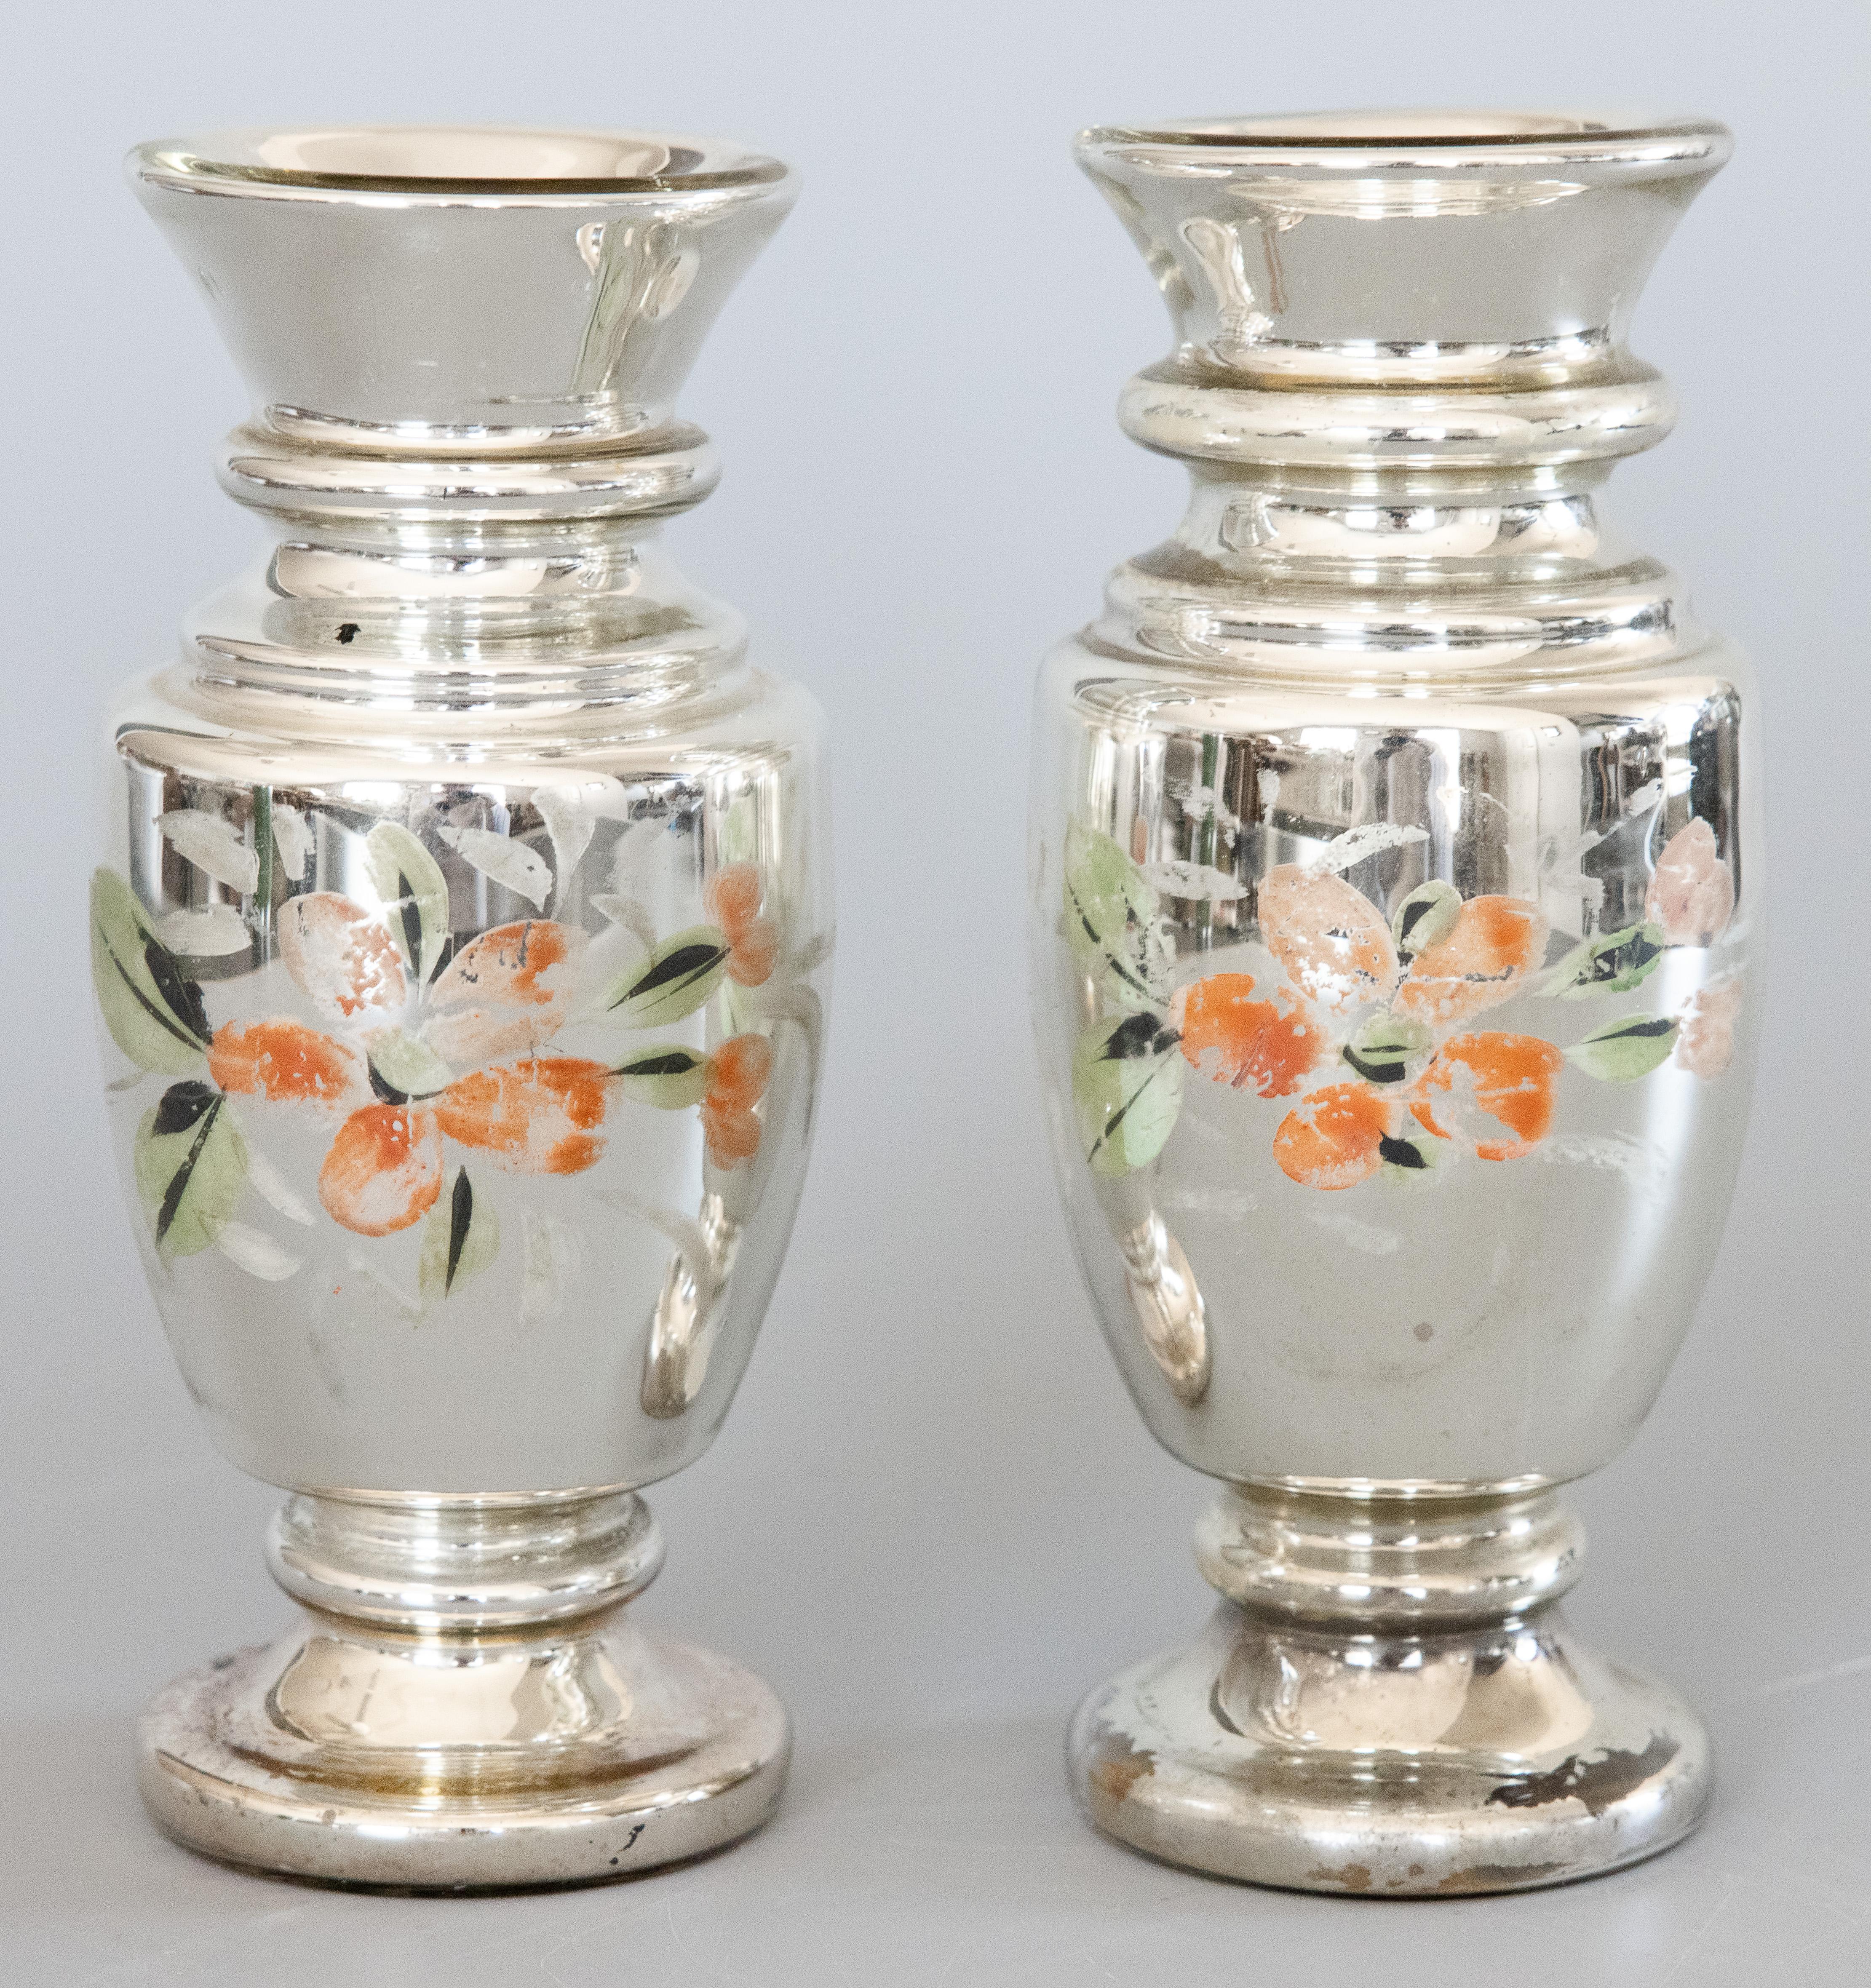 A lovely pair of authentic antique 19th-Century hand blown mercury glass decorative vases from England. These stunning vases have stylish shapes with hand painted floral designs in a beautiful patina and would be the perfect room accent